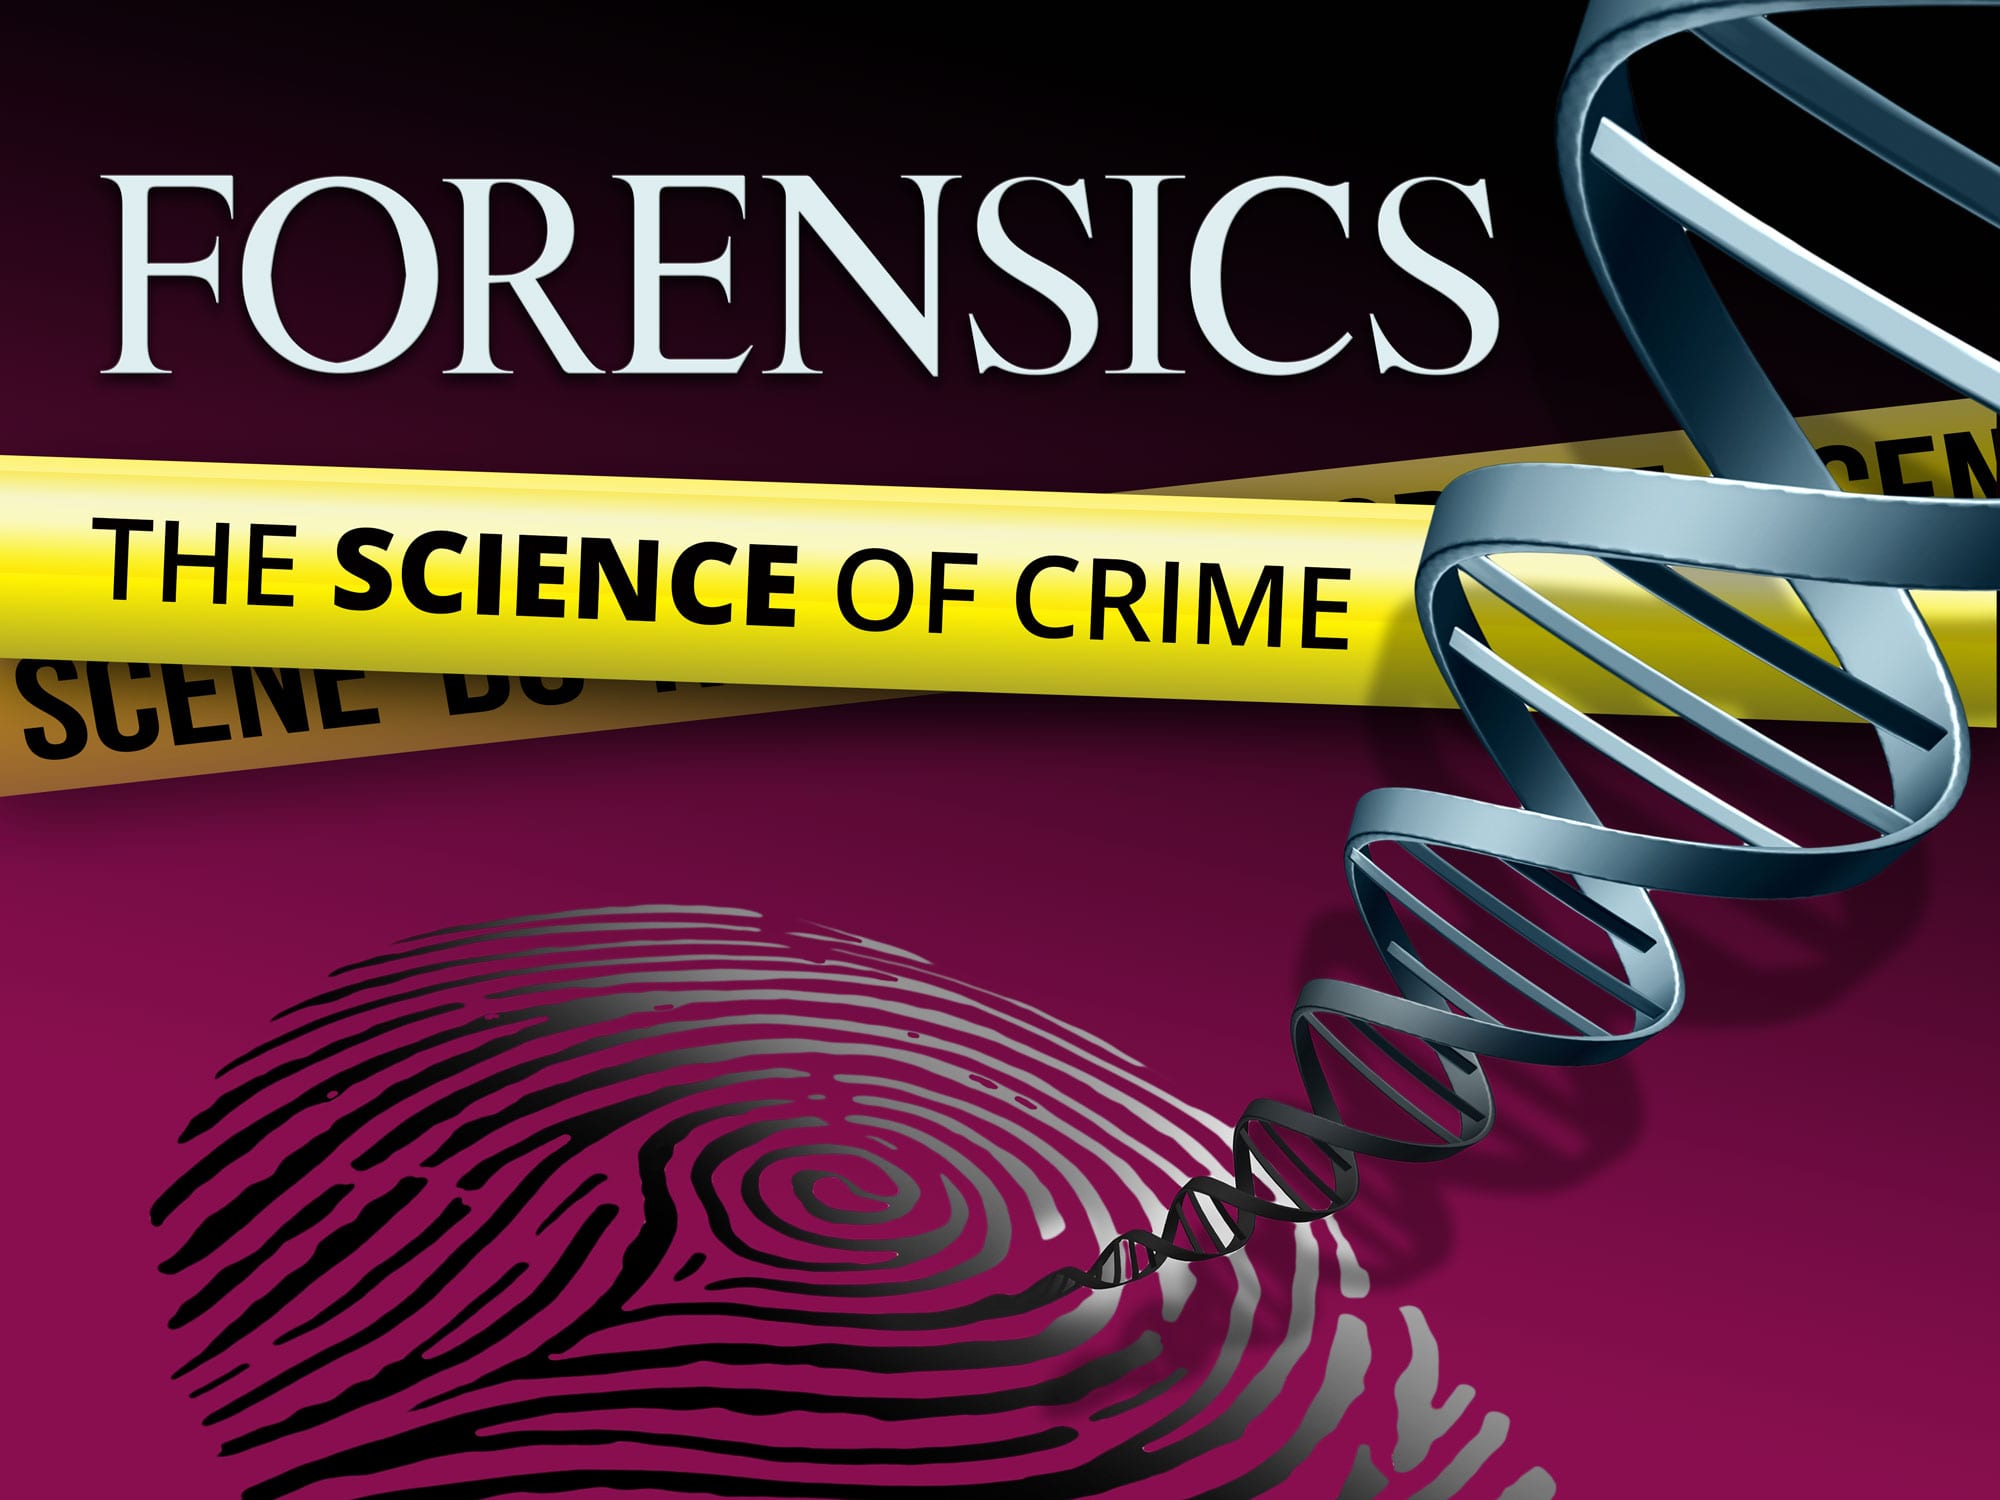 Forensics: The Science of Crime